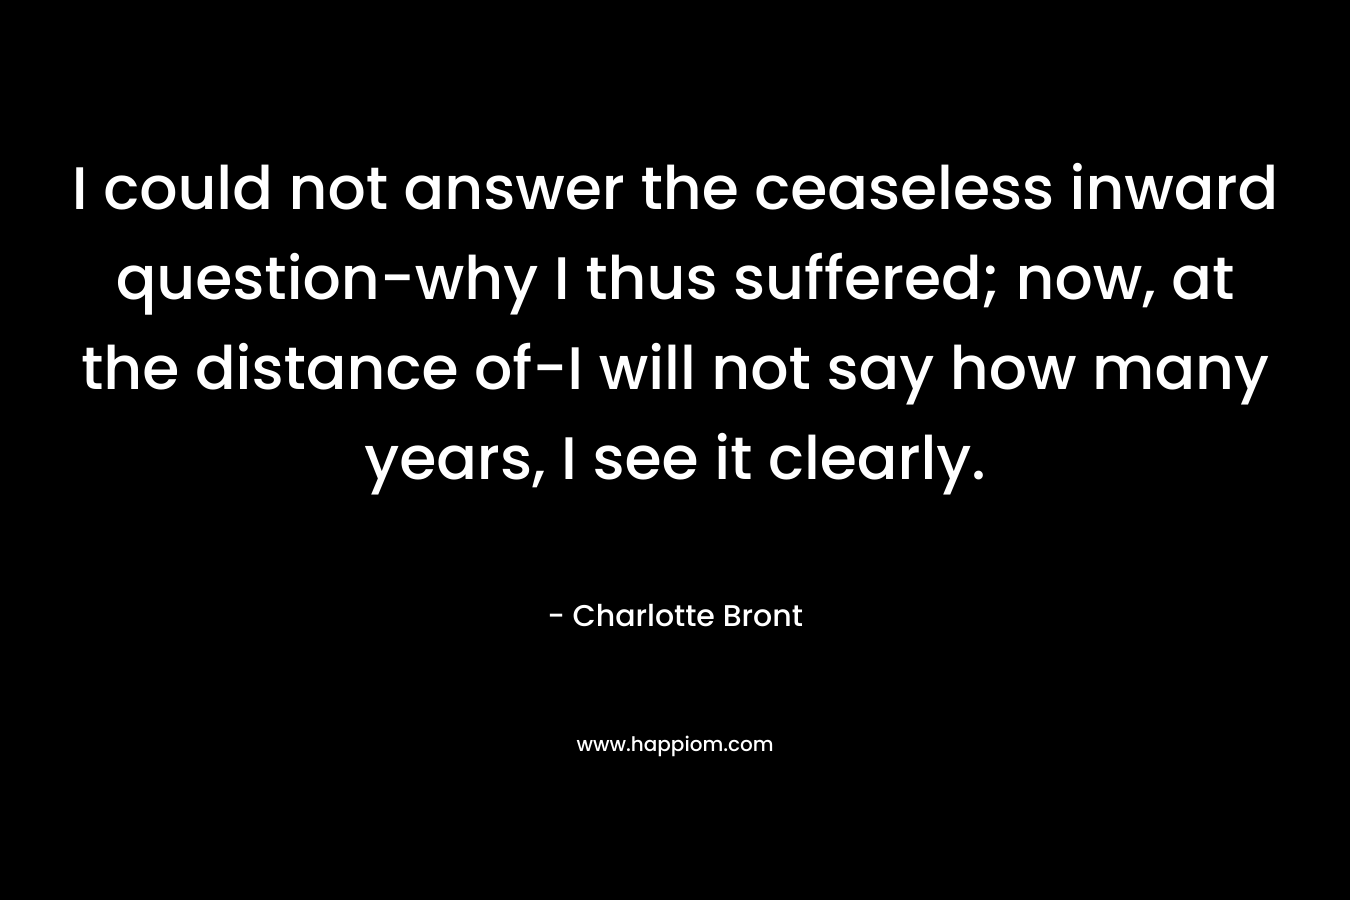 I could not answer the ceaseless inward question-why I thus suffered; now, at the distance of-I will not say how many years, I see it clearly. – Charlotte Bront